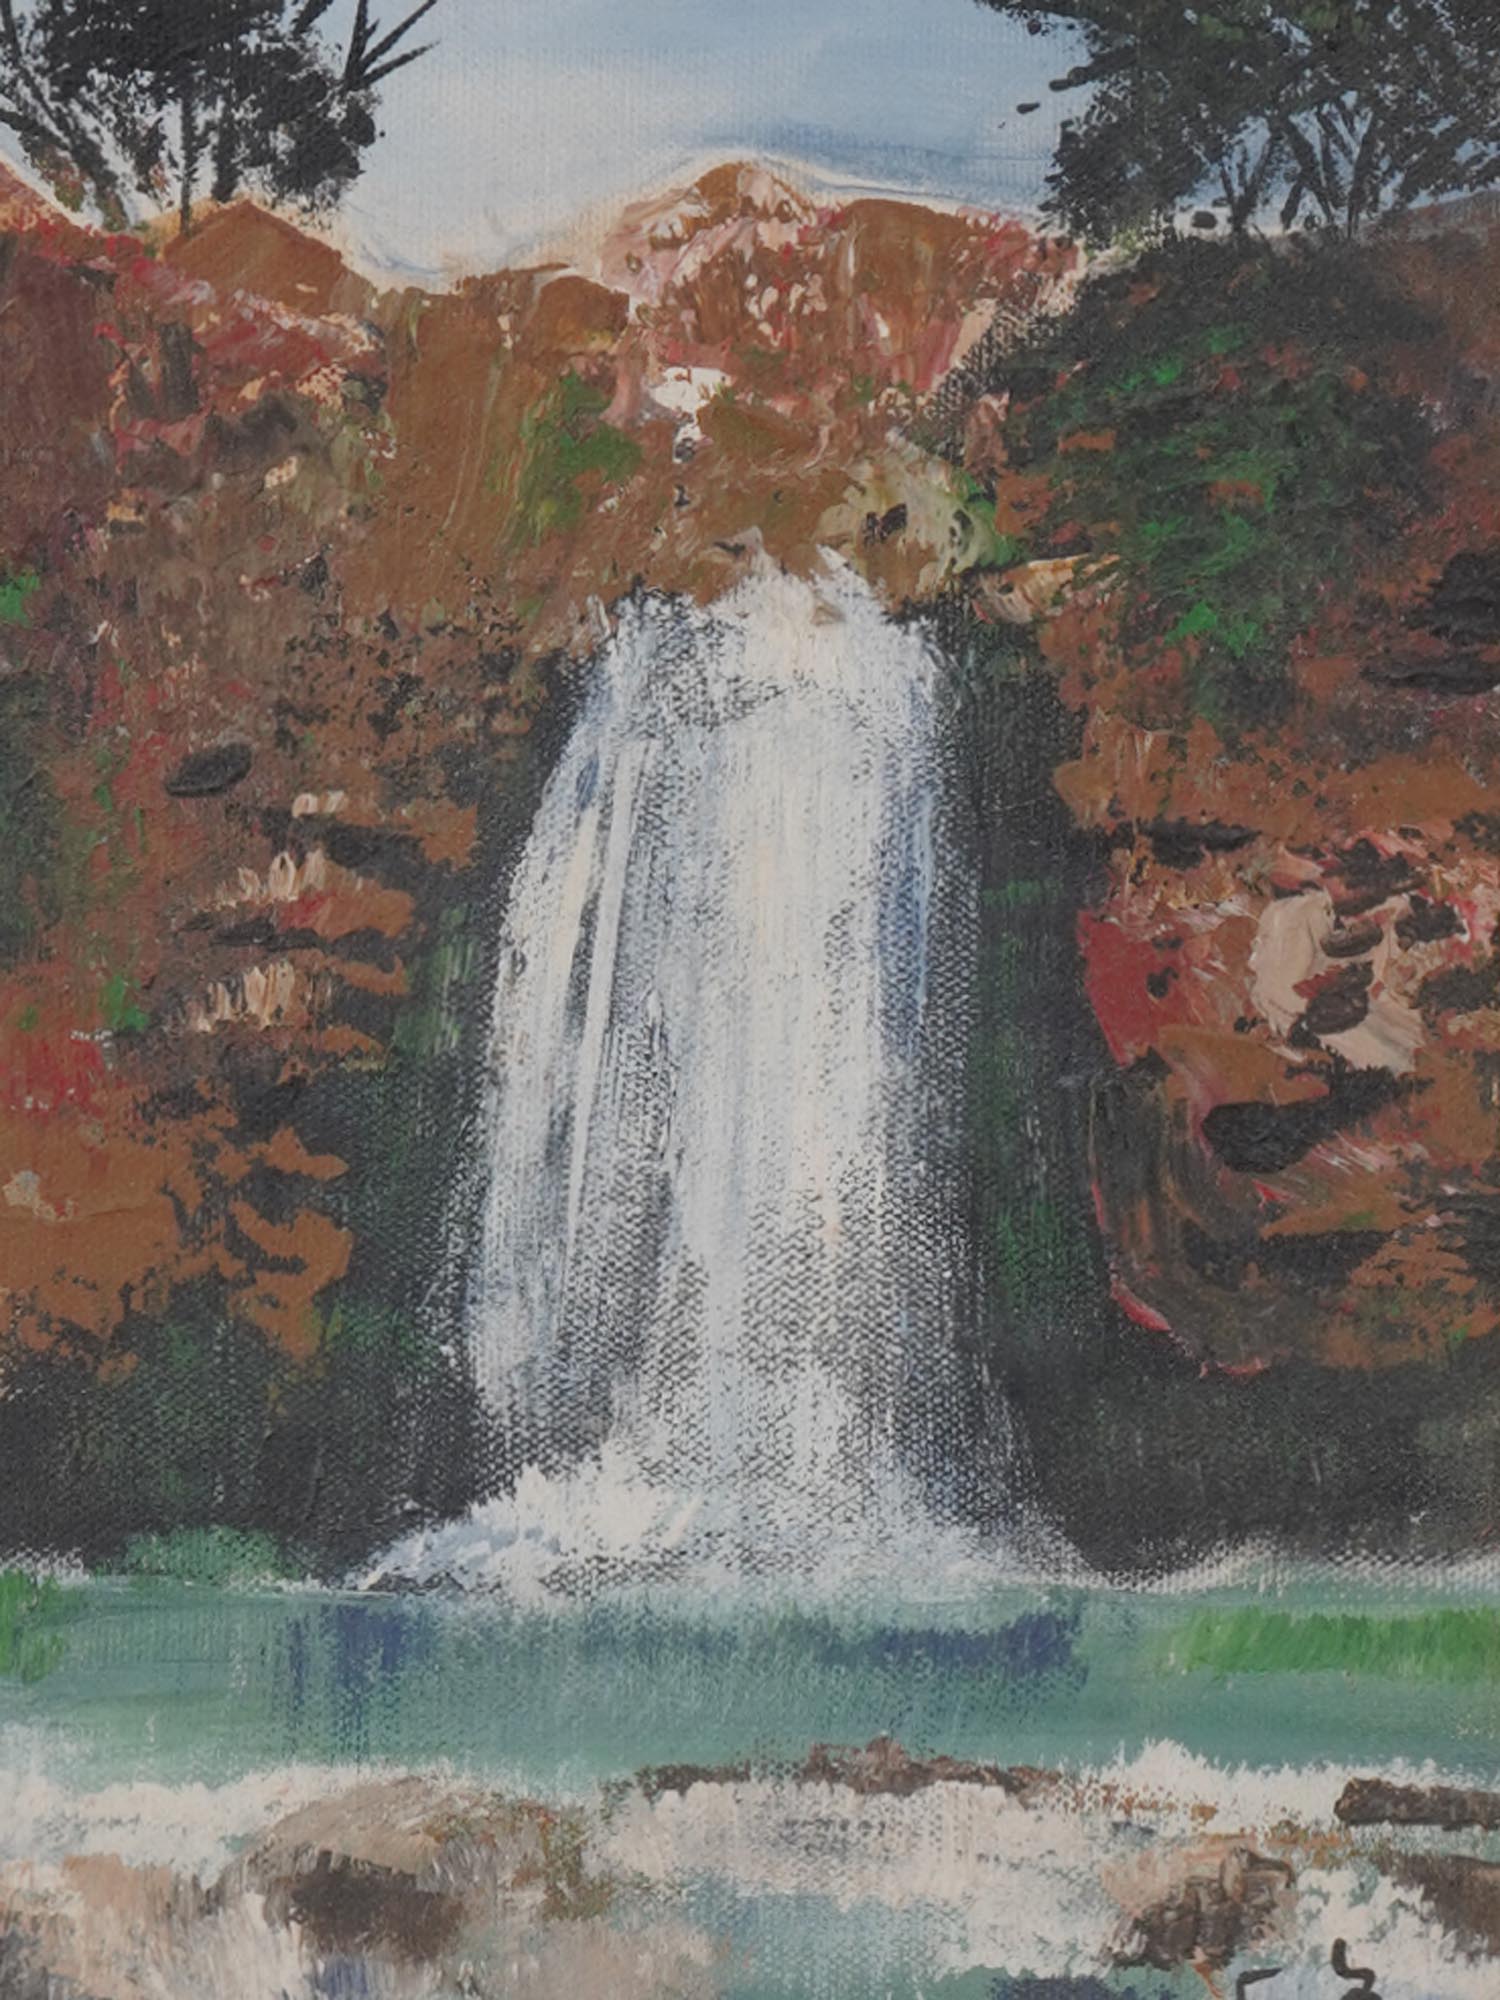 OIL PAINTING WATERFALL IN THE MANNER OF BOB ROSS PIC-1